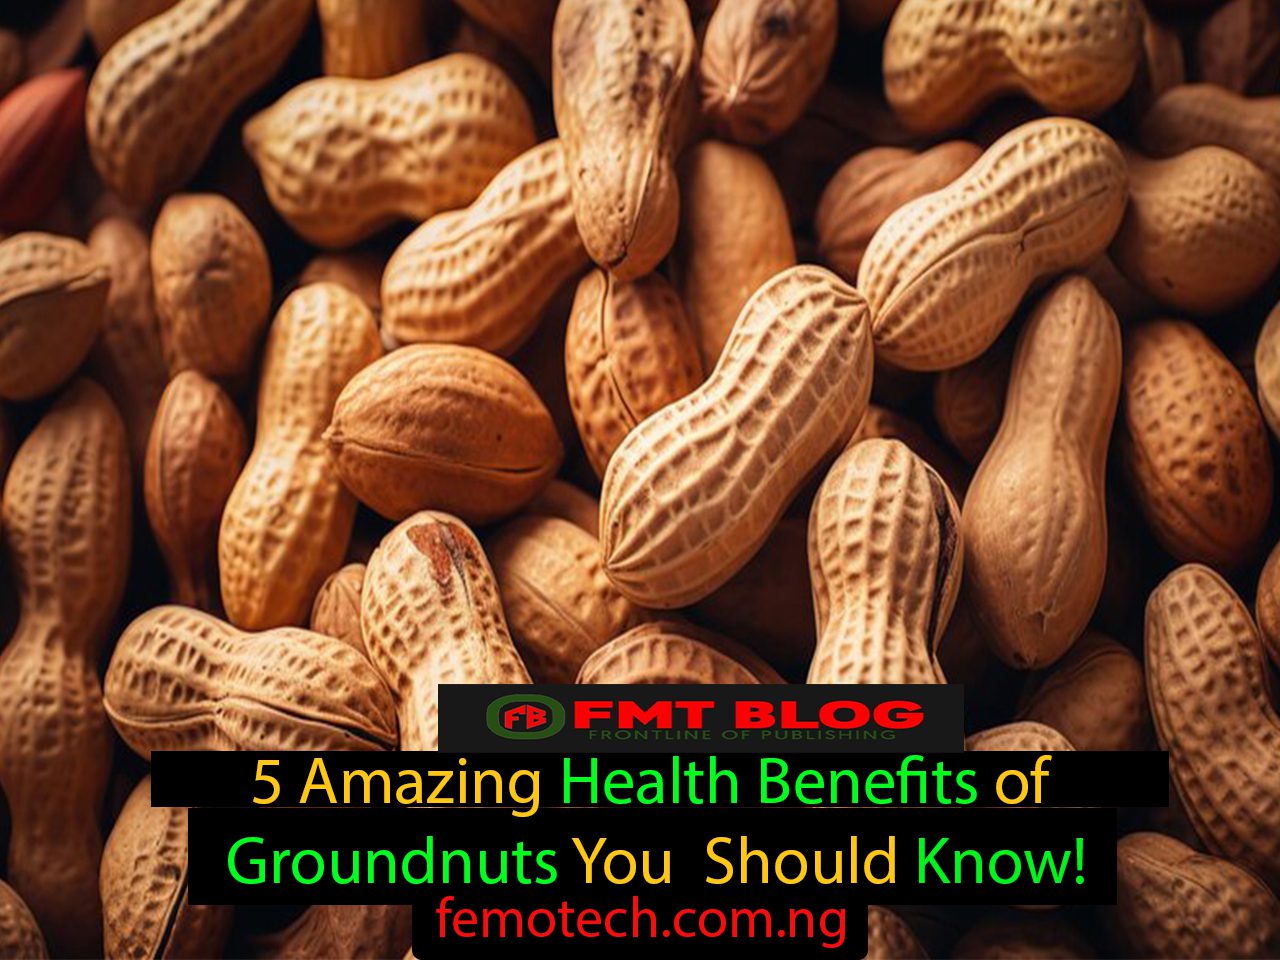 5 Amazing Health Benefits of Groundnuts You Should Know!